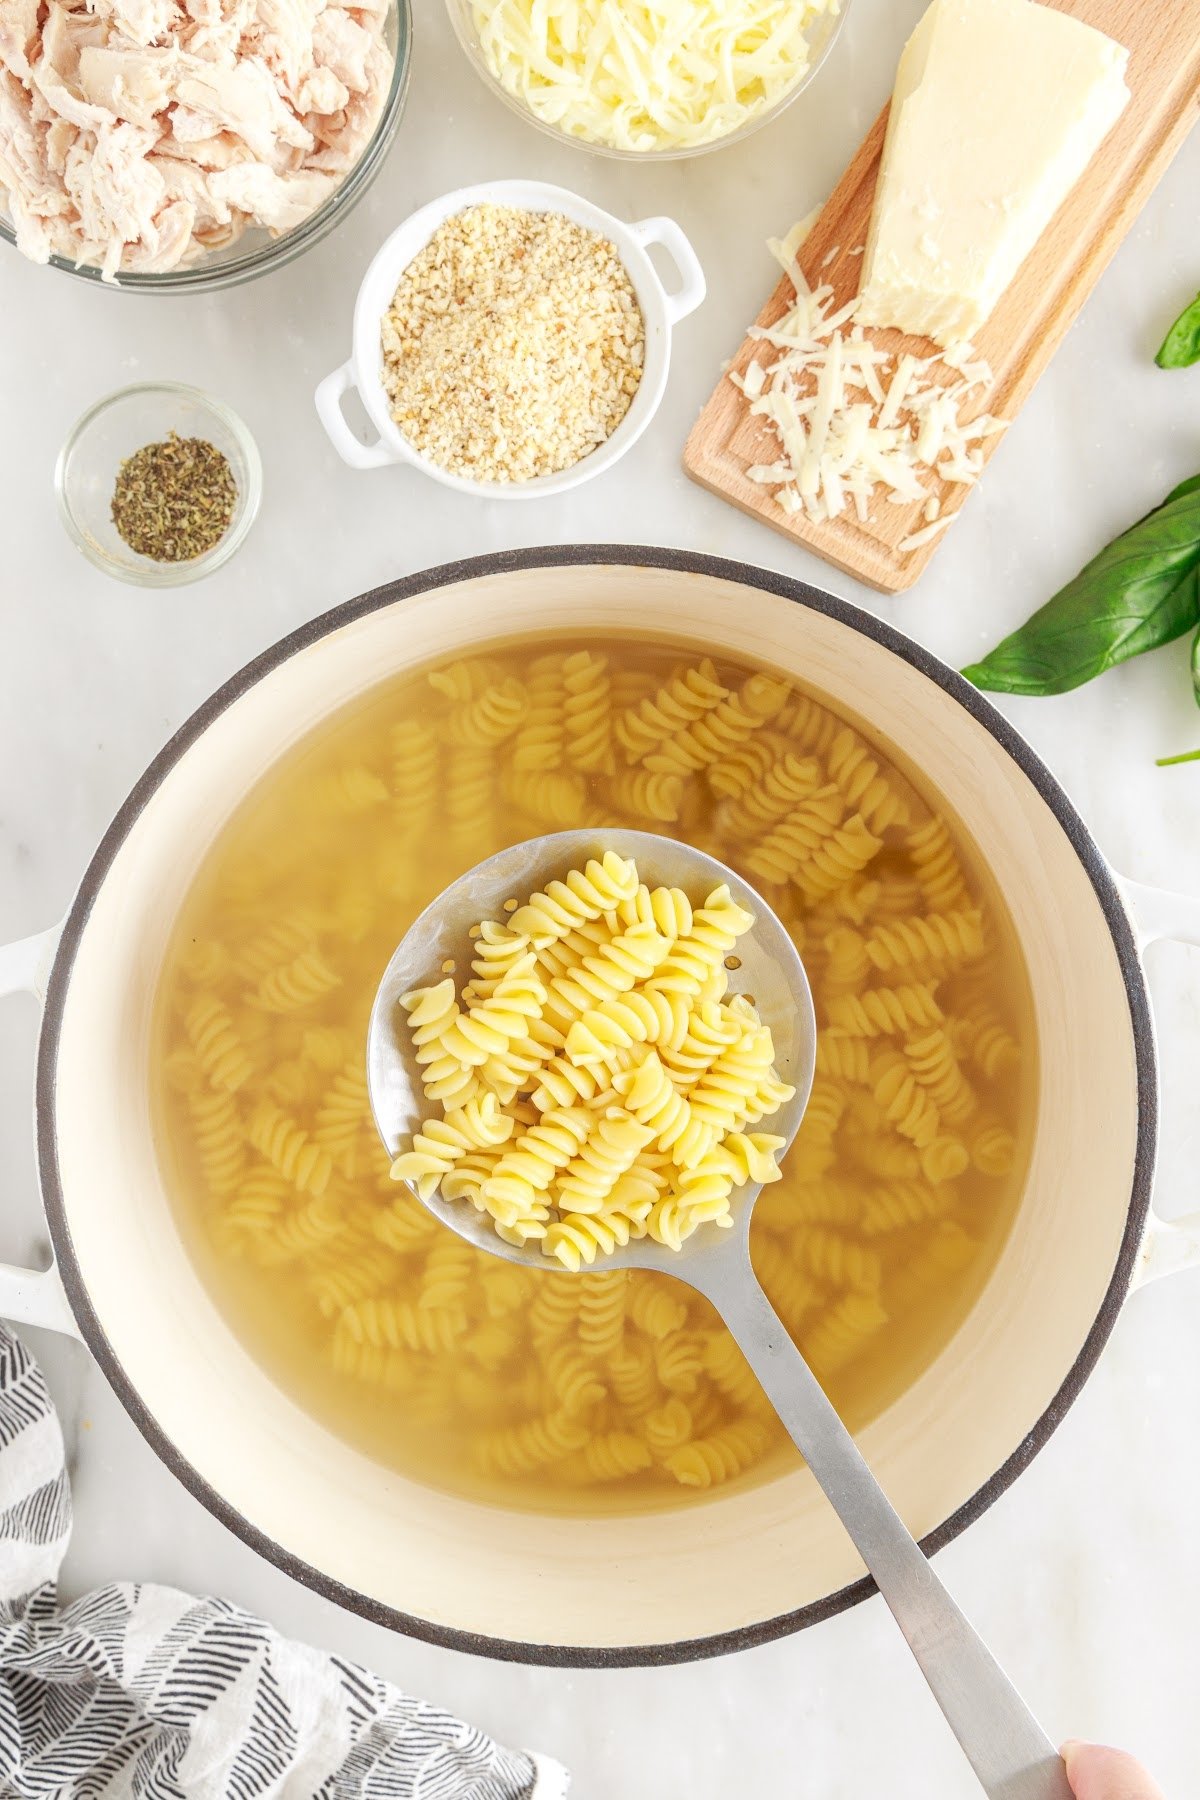 Cooked pasta in a large bowl with a spoon on top filled with noodles.